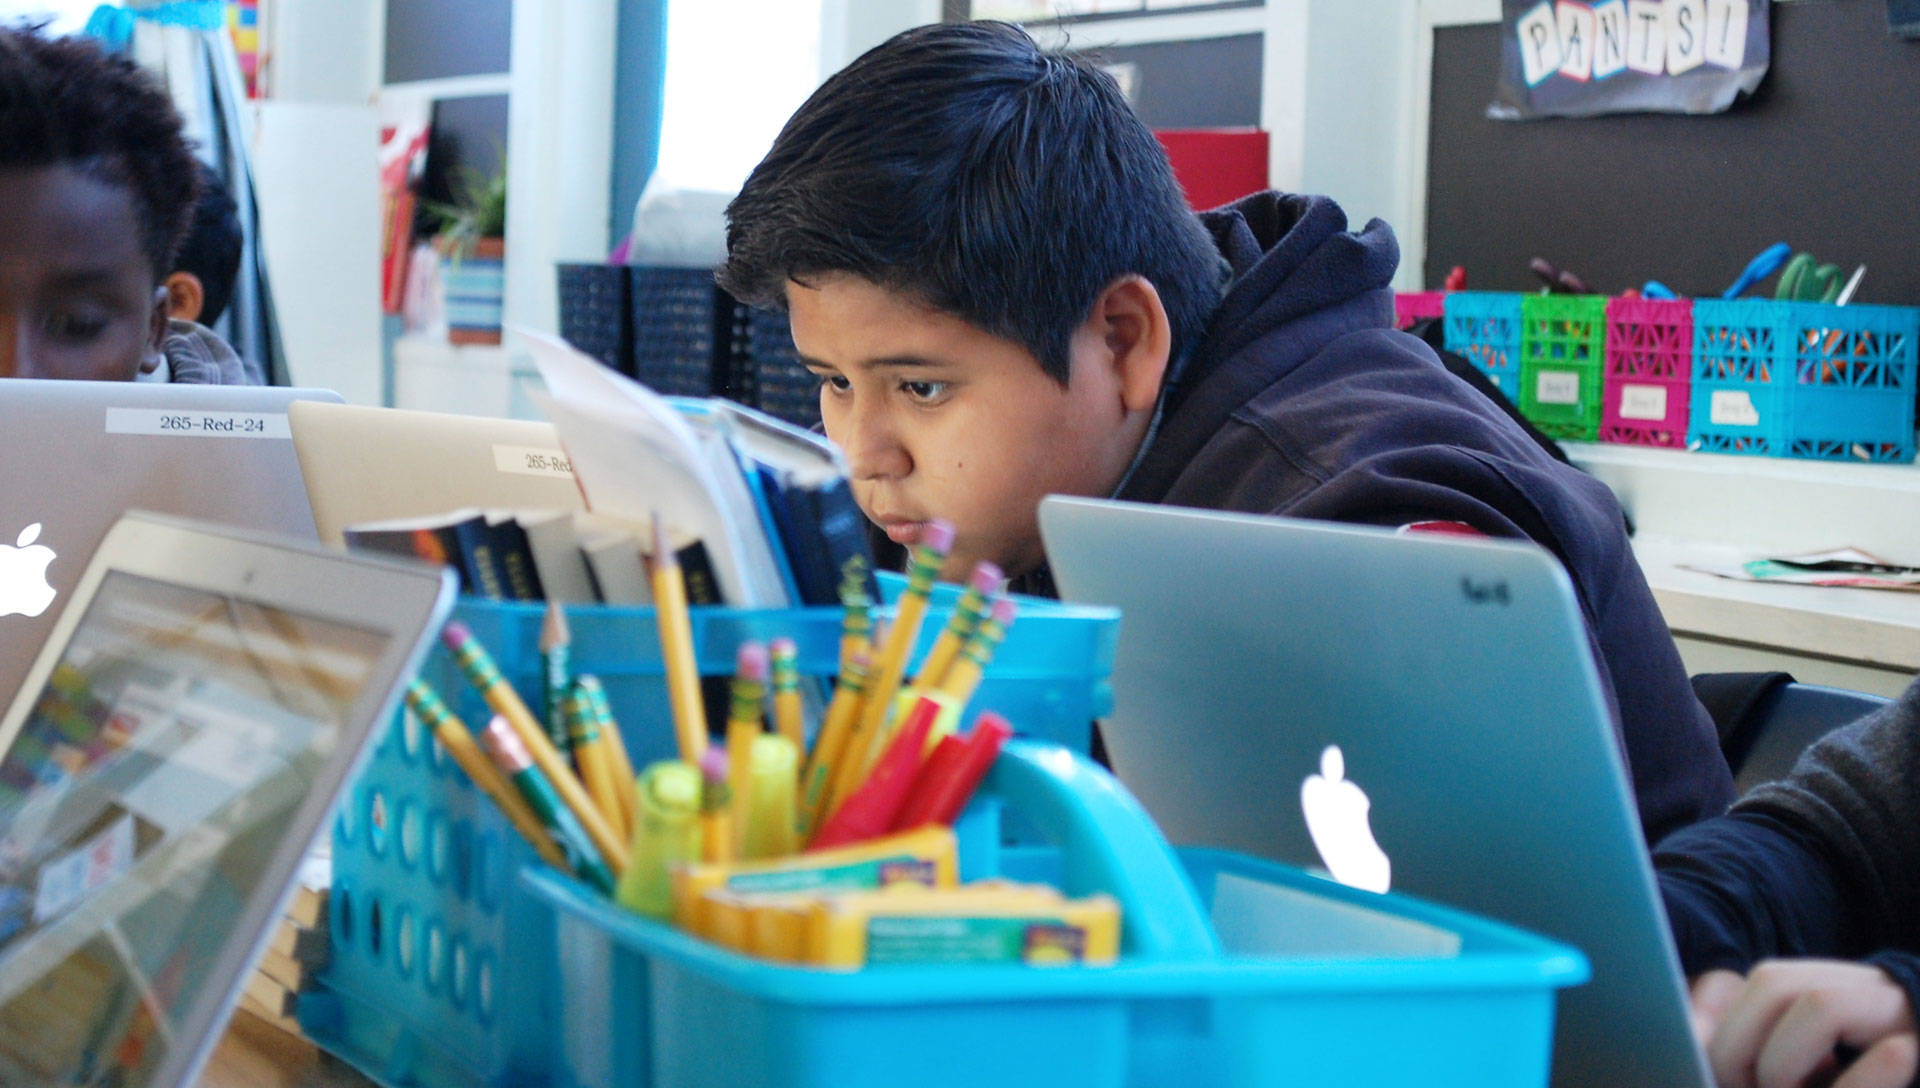 Eleven-year-old Carlos Delrio focuses on completing a computer assignment in his sixth grade class at Oak Ridge Elementary School in Sacramento. Gabriel Salcedo/KQED